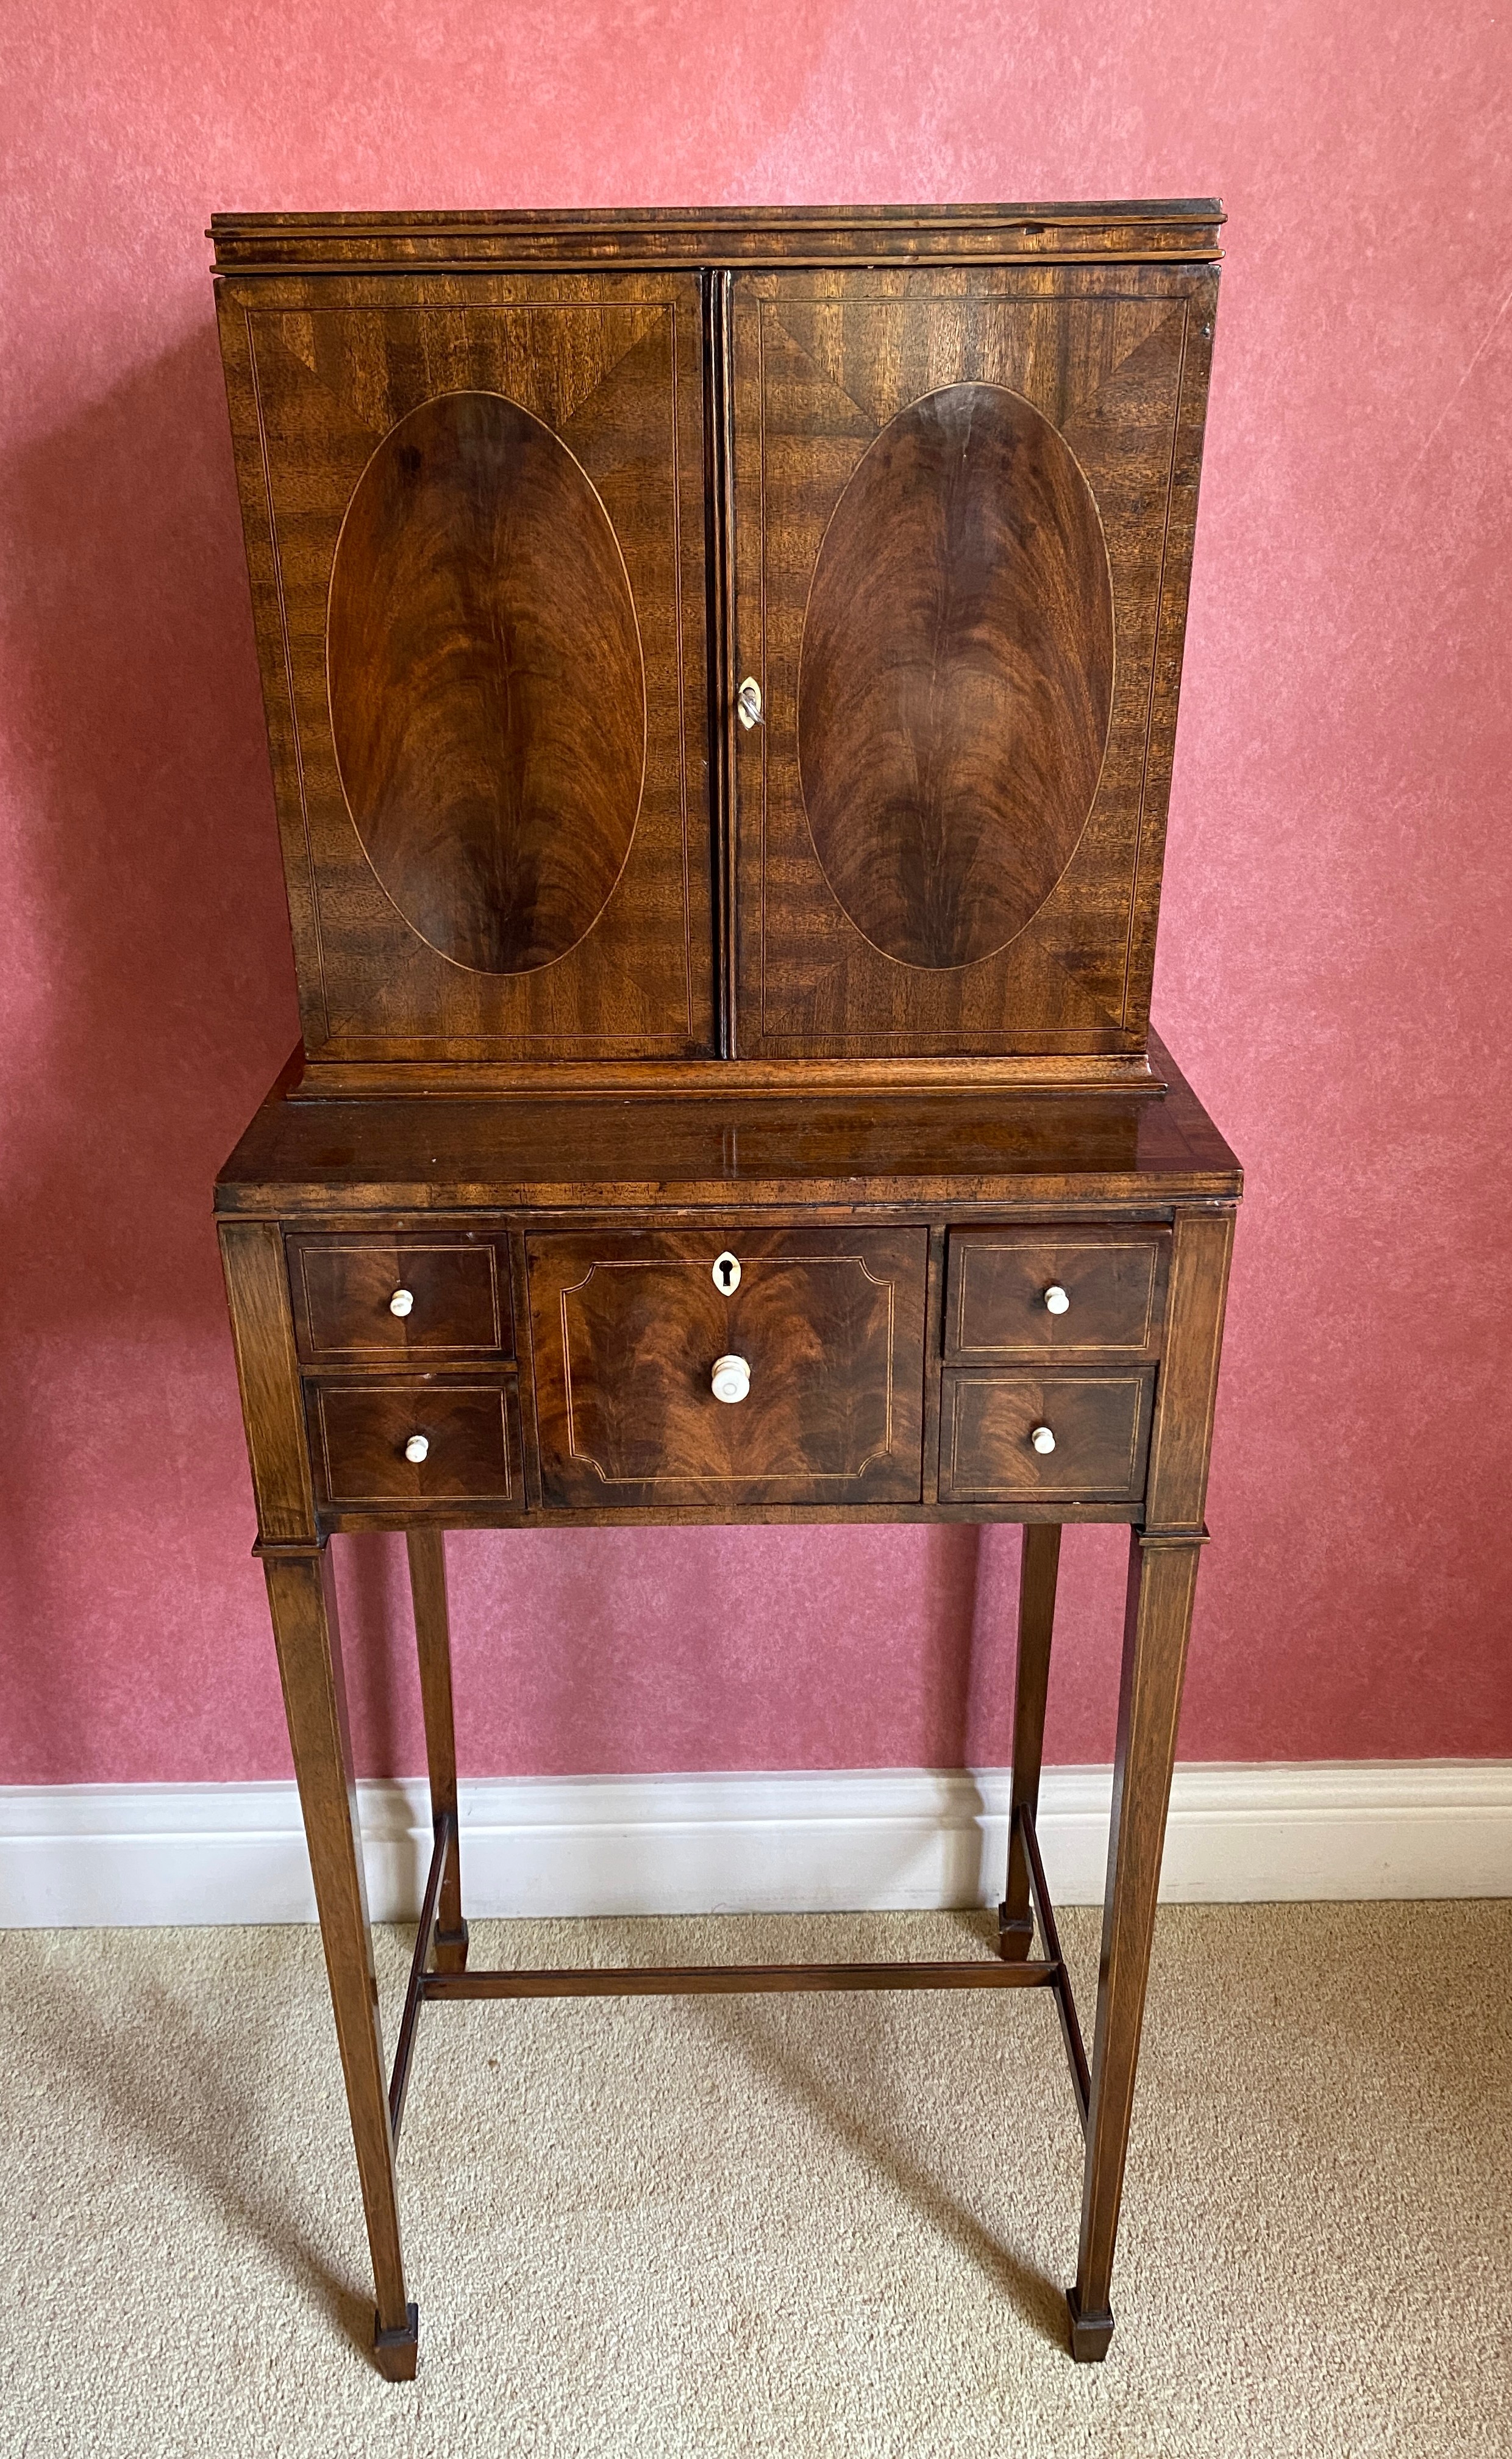 An Edwardian mahogany inlaid cabinet, 2 doors over 4 drawers on square tapered legs. Ivory